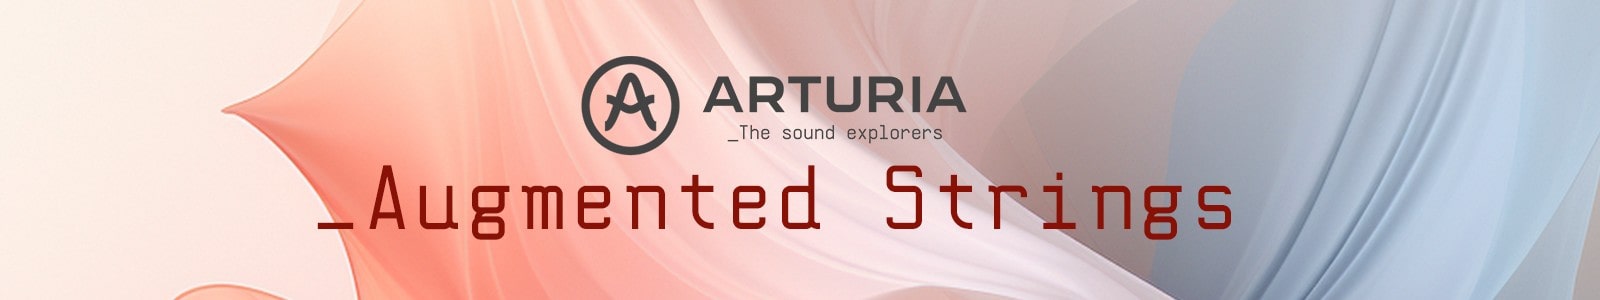 Augmented Strings by Arturia